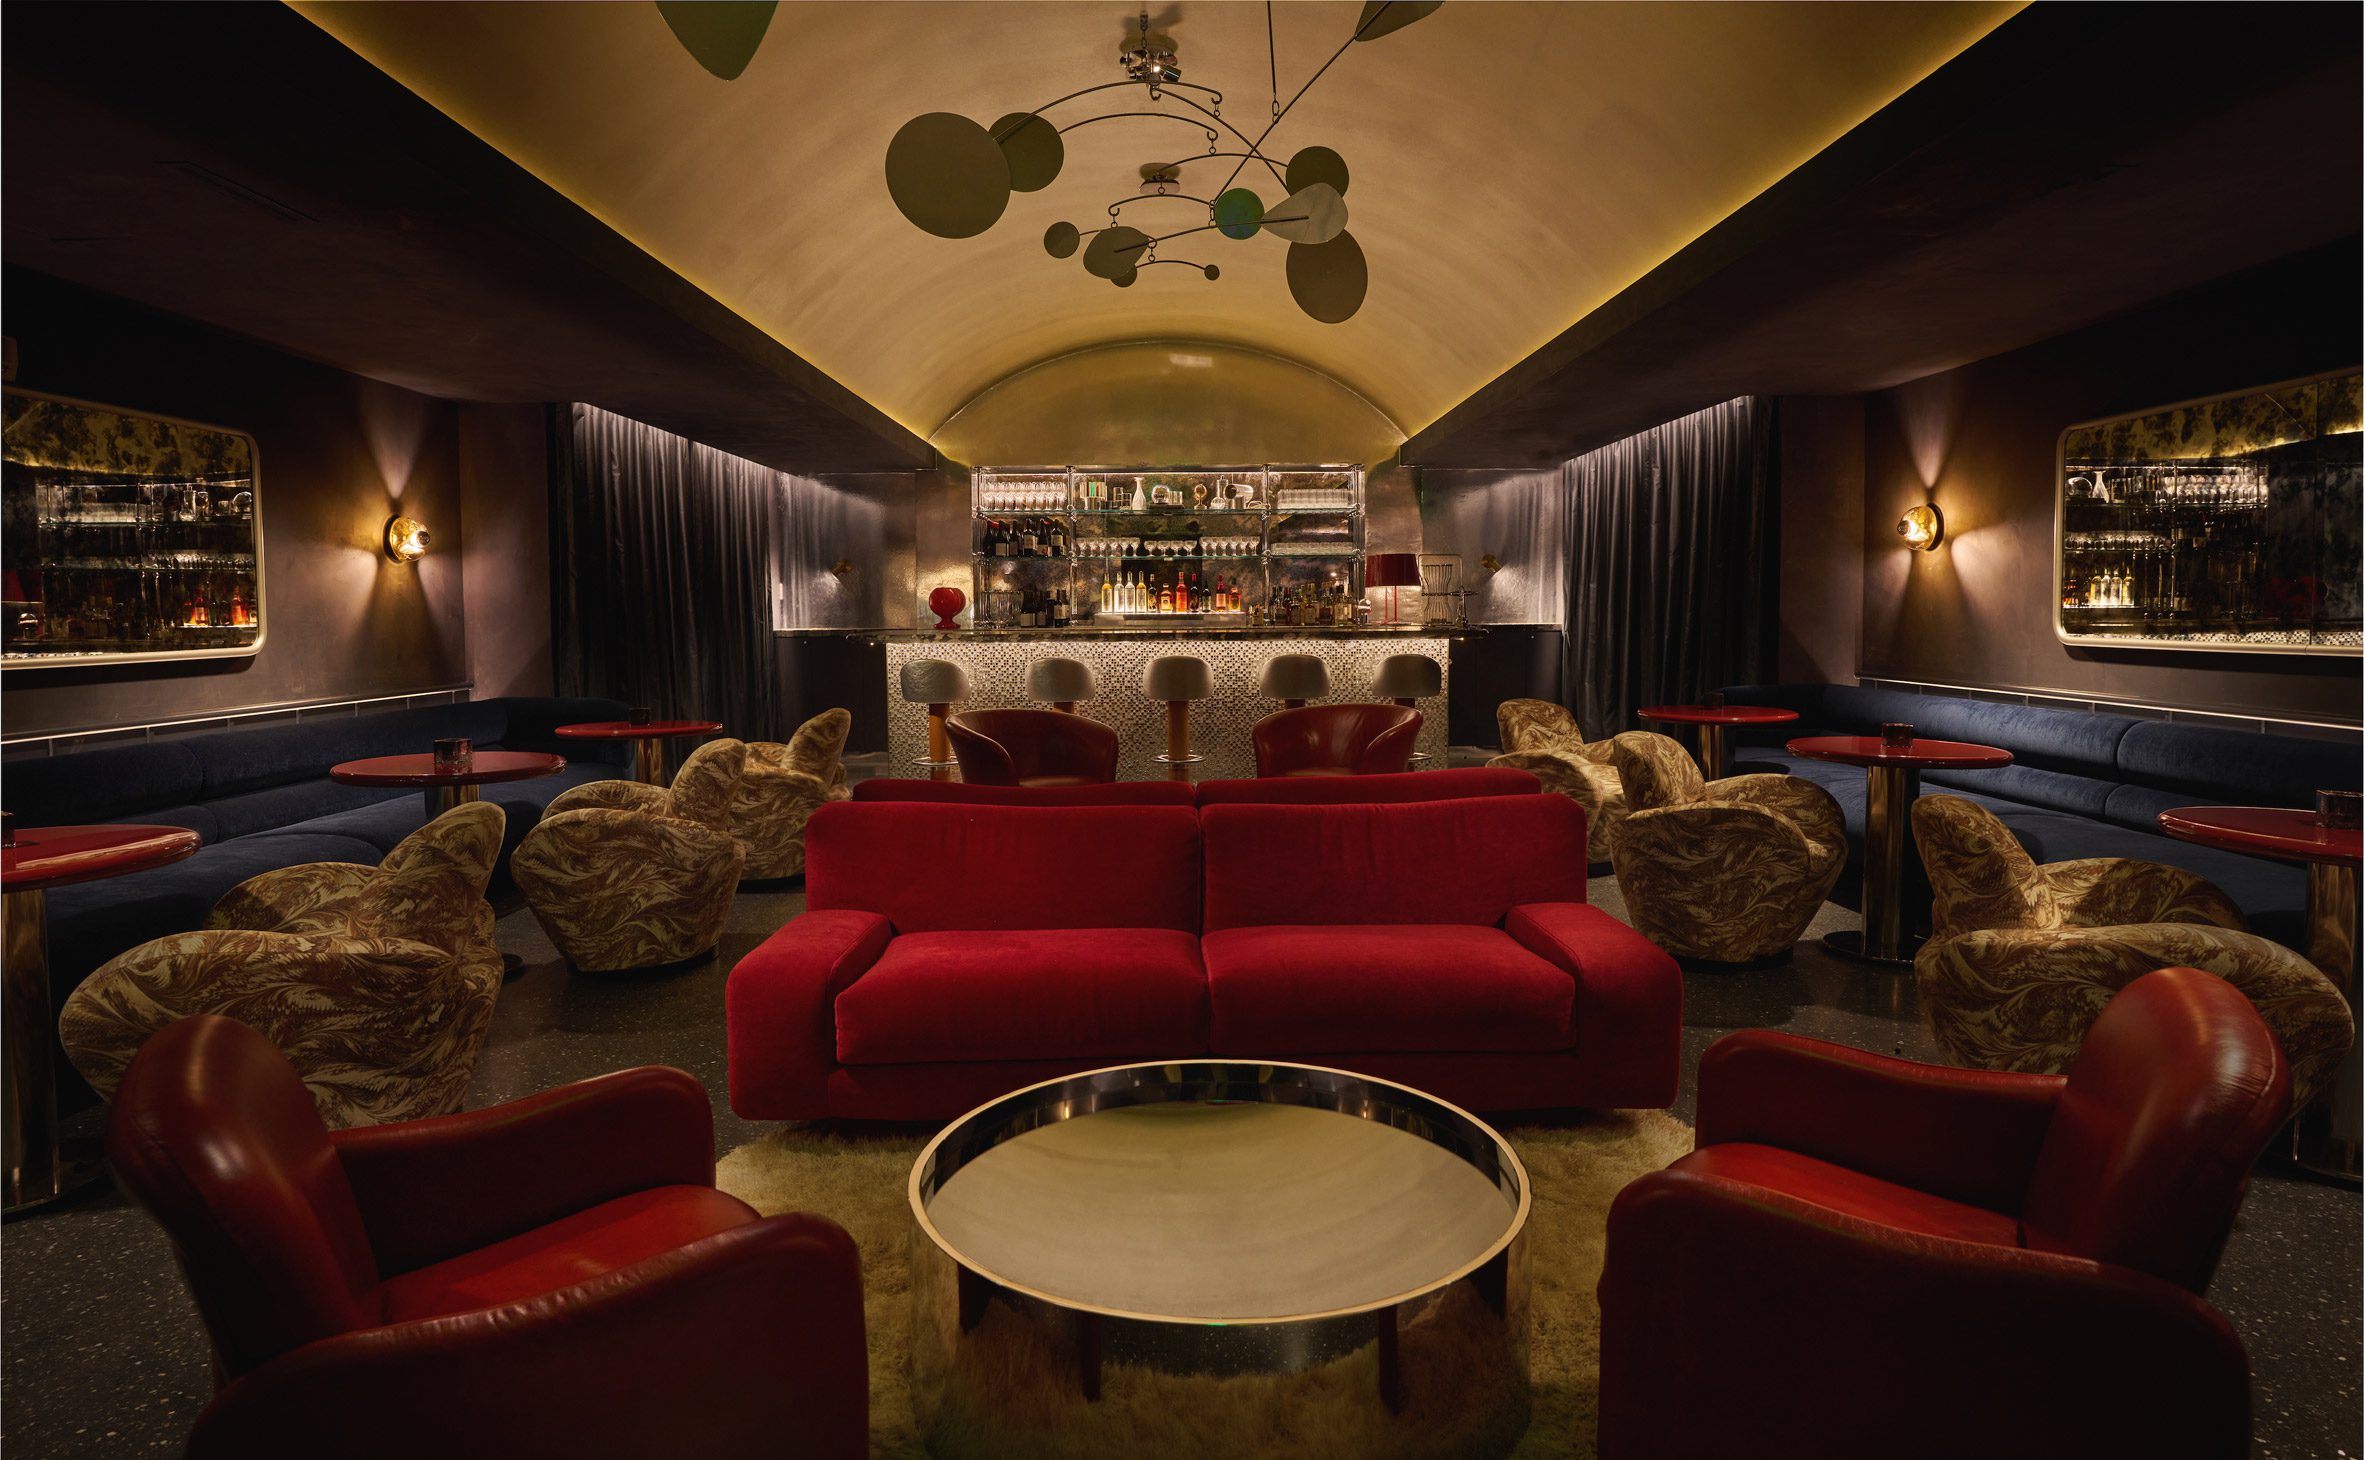 Dark bar lounge with a vaulted golden ceiling